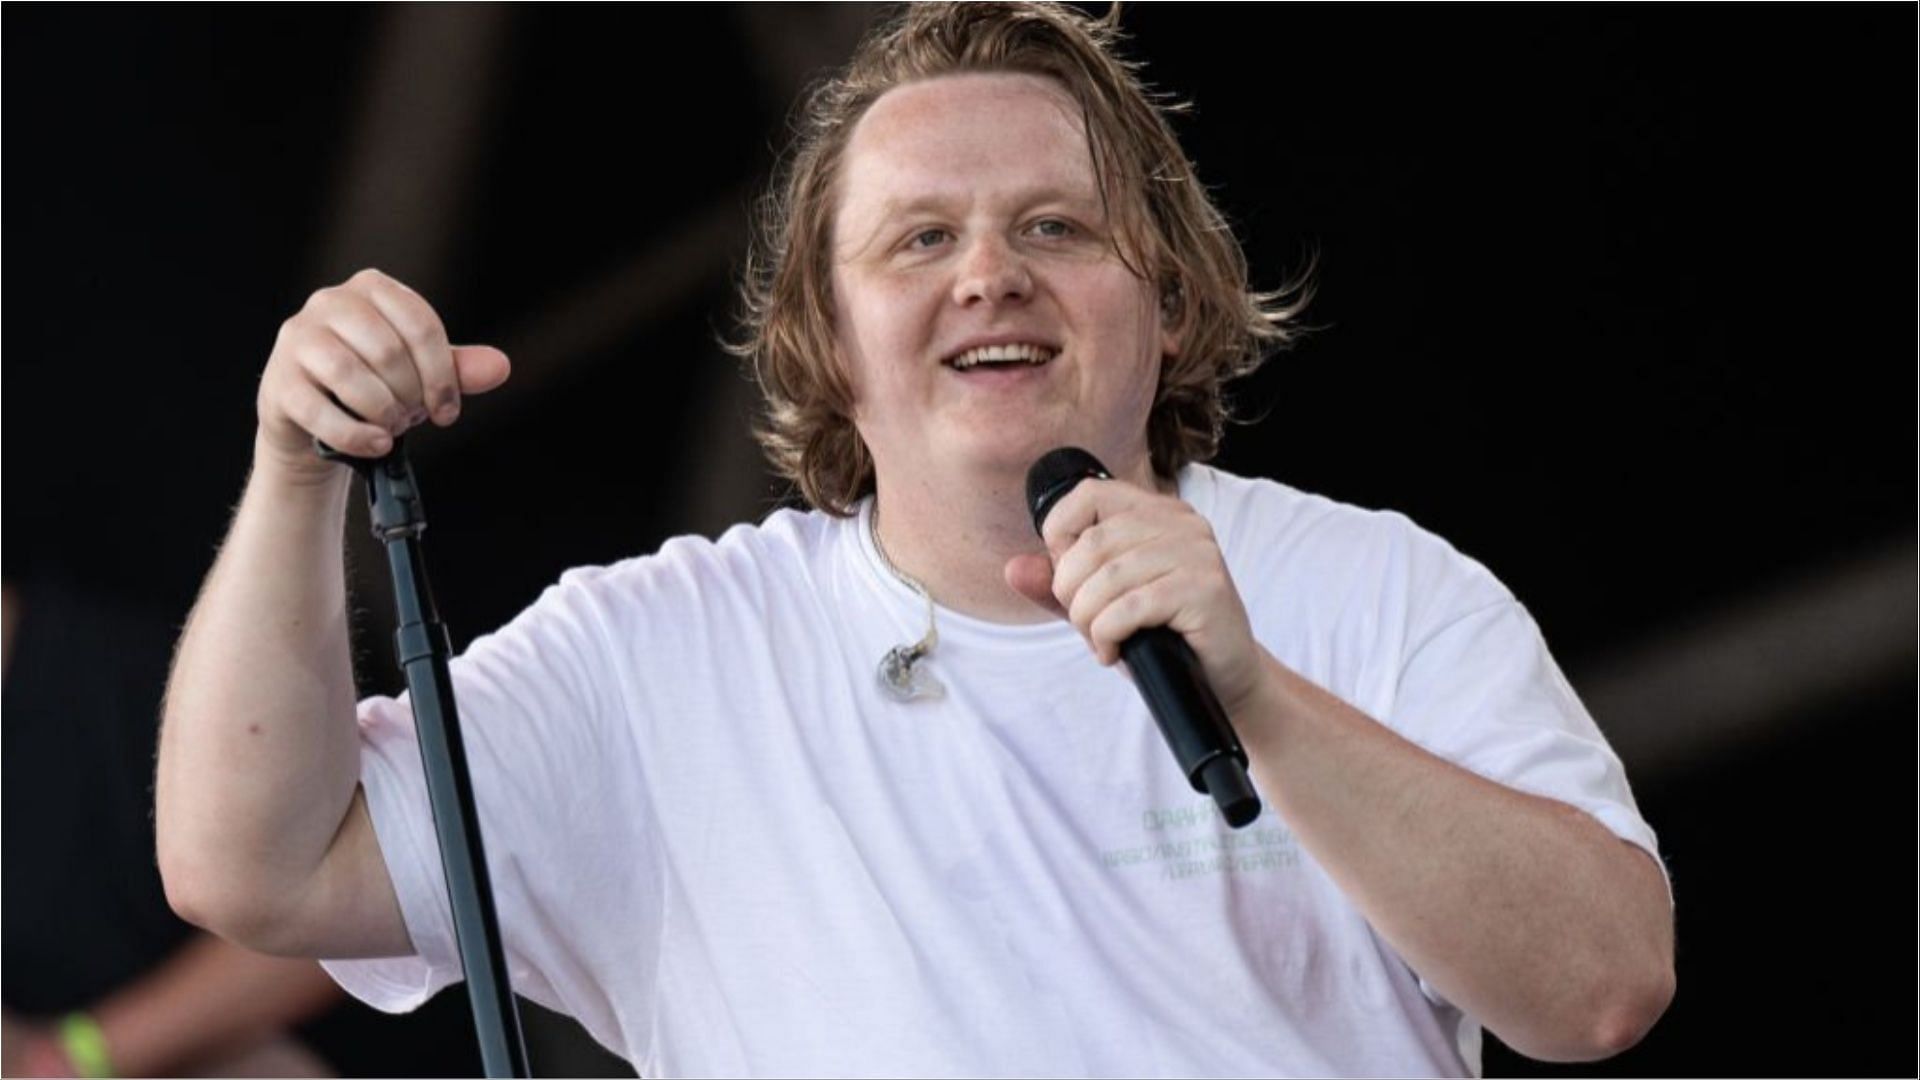 Lewis Capaldi Announces 'Divinely Uninspired To A Hellish Extent